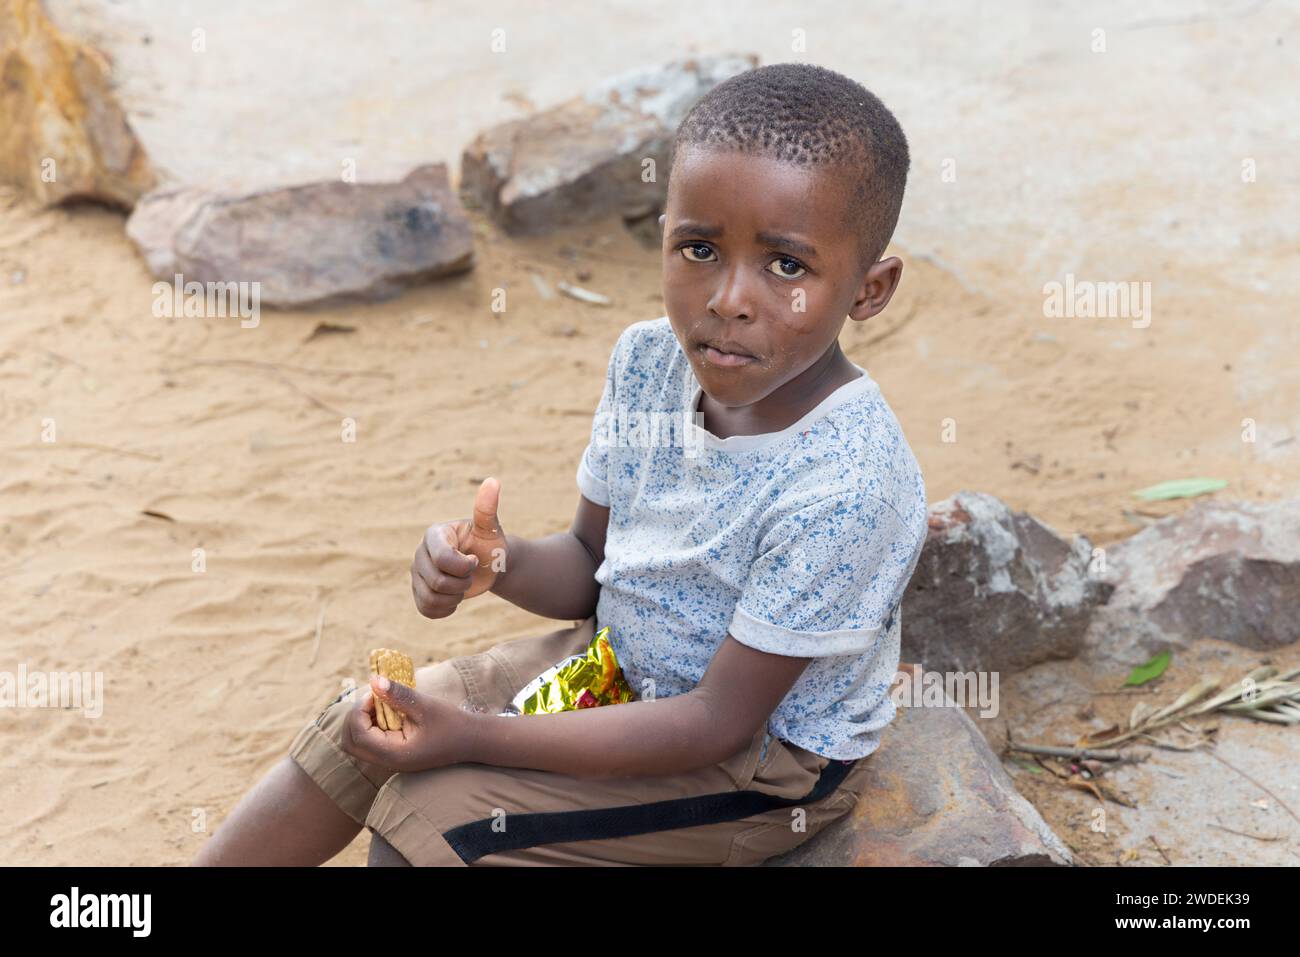 african, charity, children, horizontal, orphan, smiling, hunger, poverty, people, poor, happiness, front, relaxation, africa, south africa, lifestyles Stock Photo